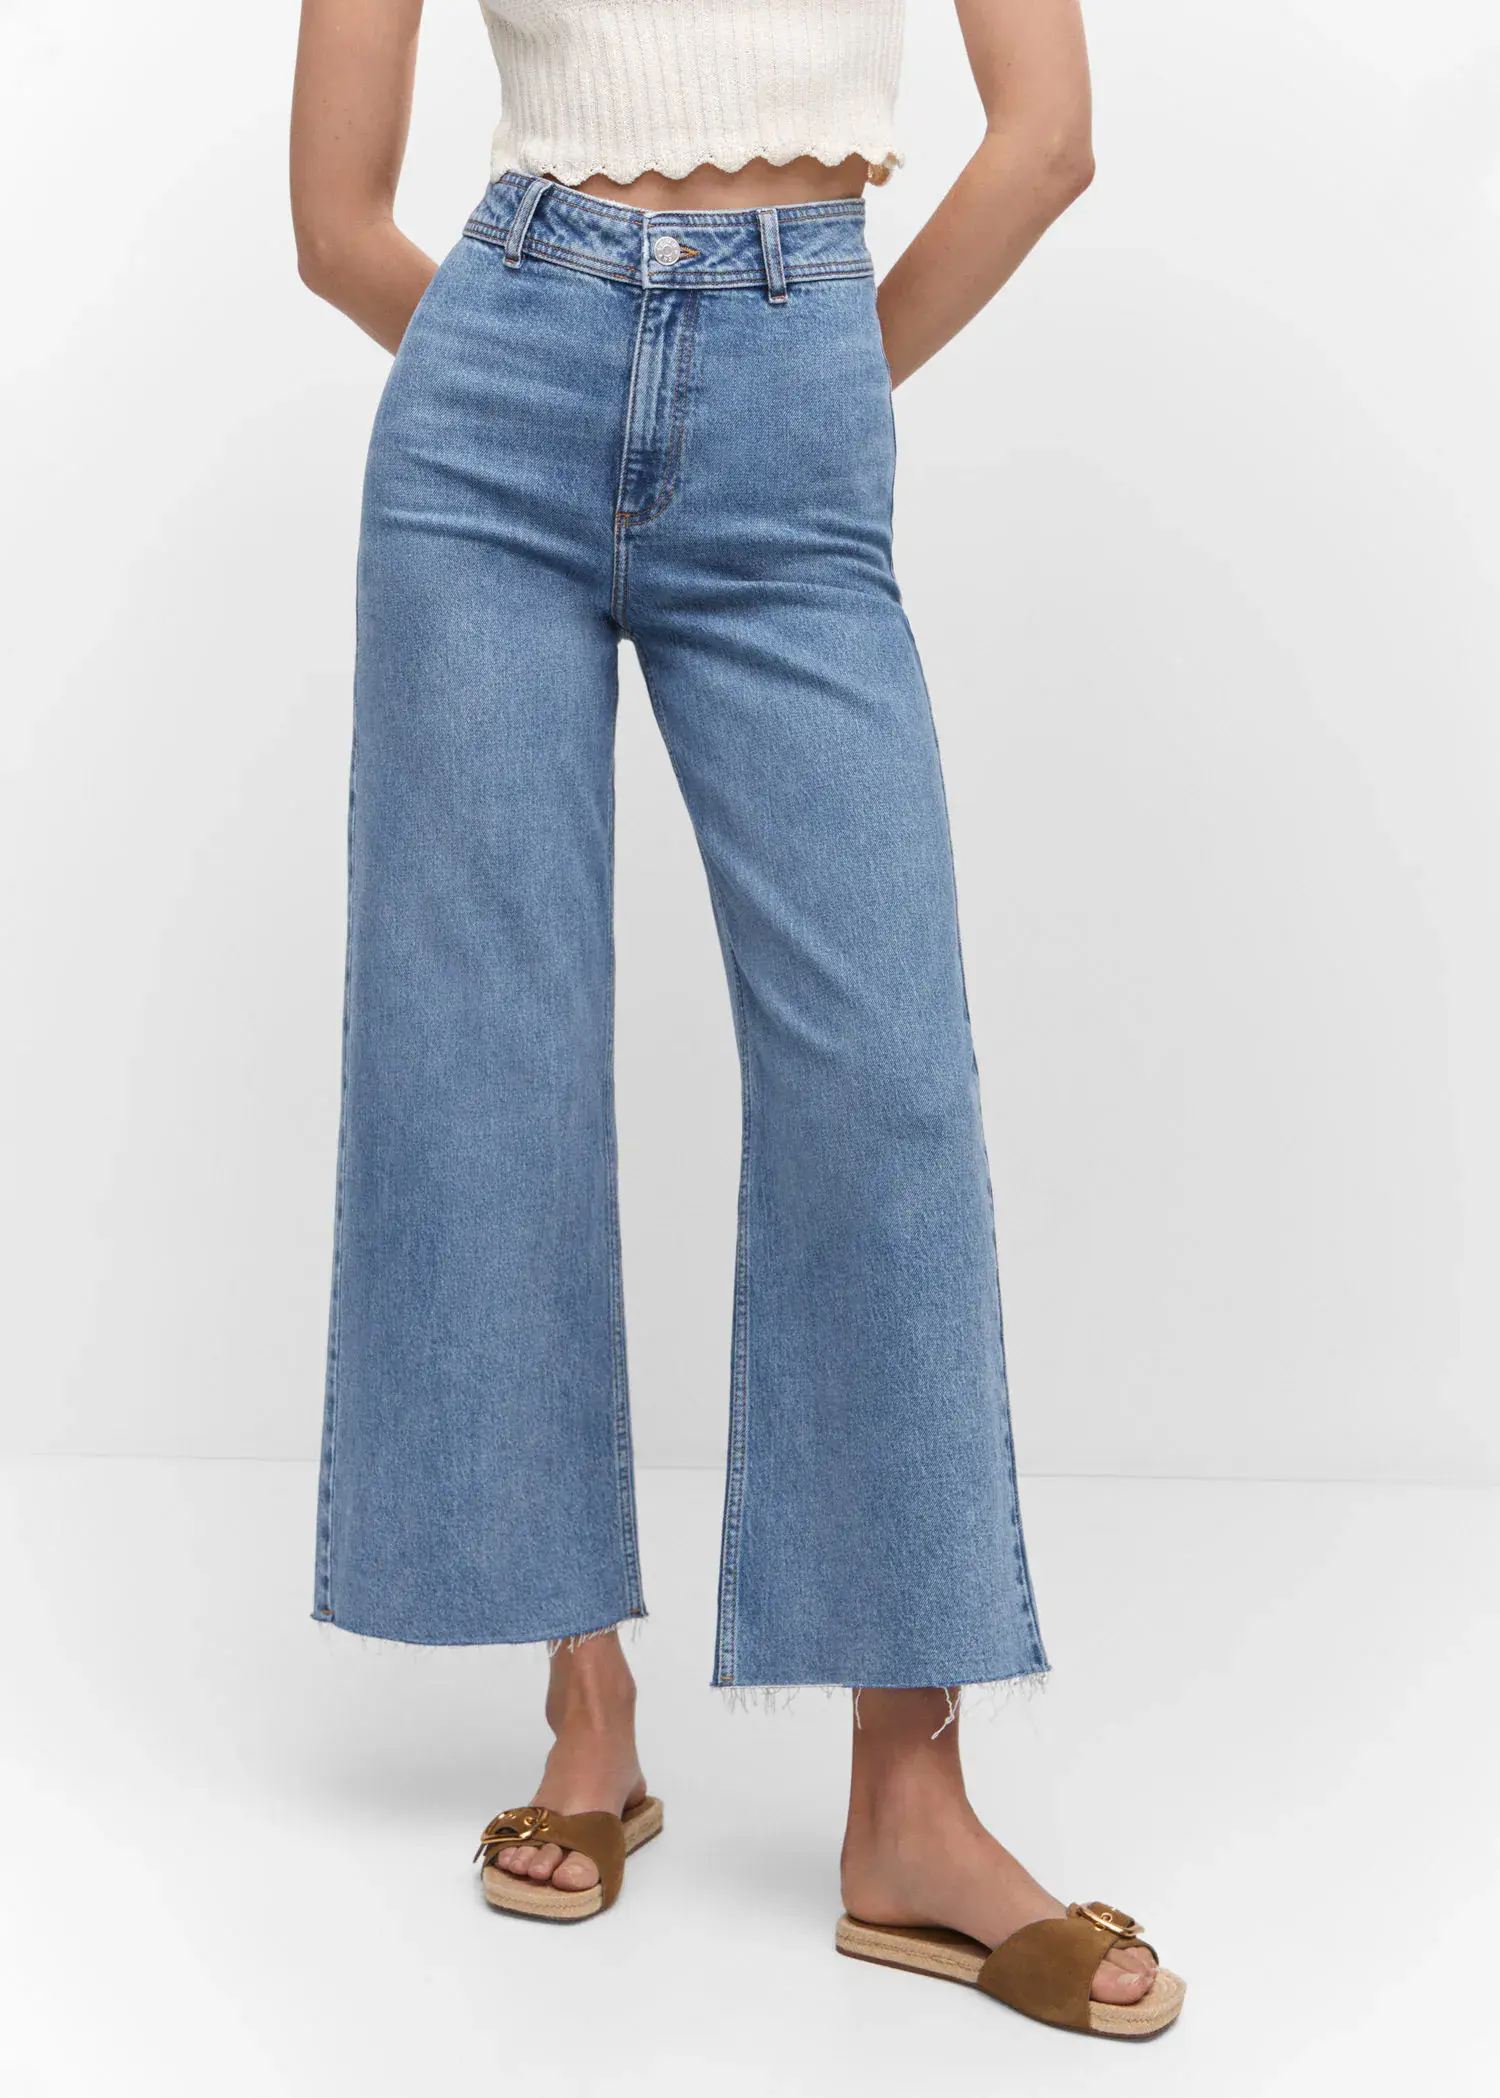 Mango Jeans culotte high waist. a person wearing a pair of blue jeans. 